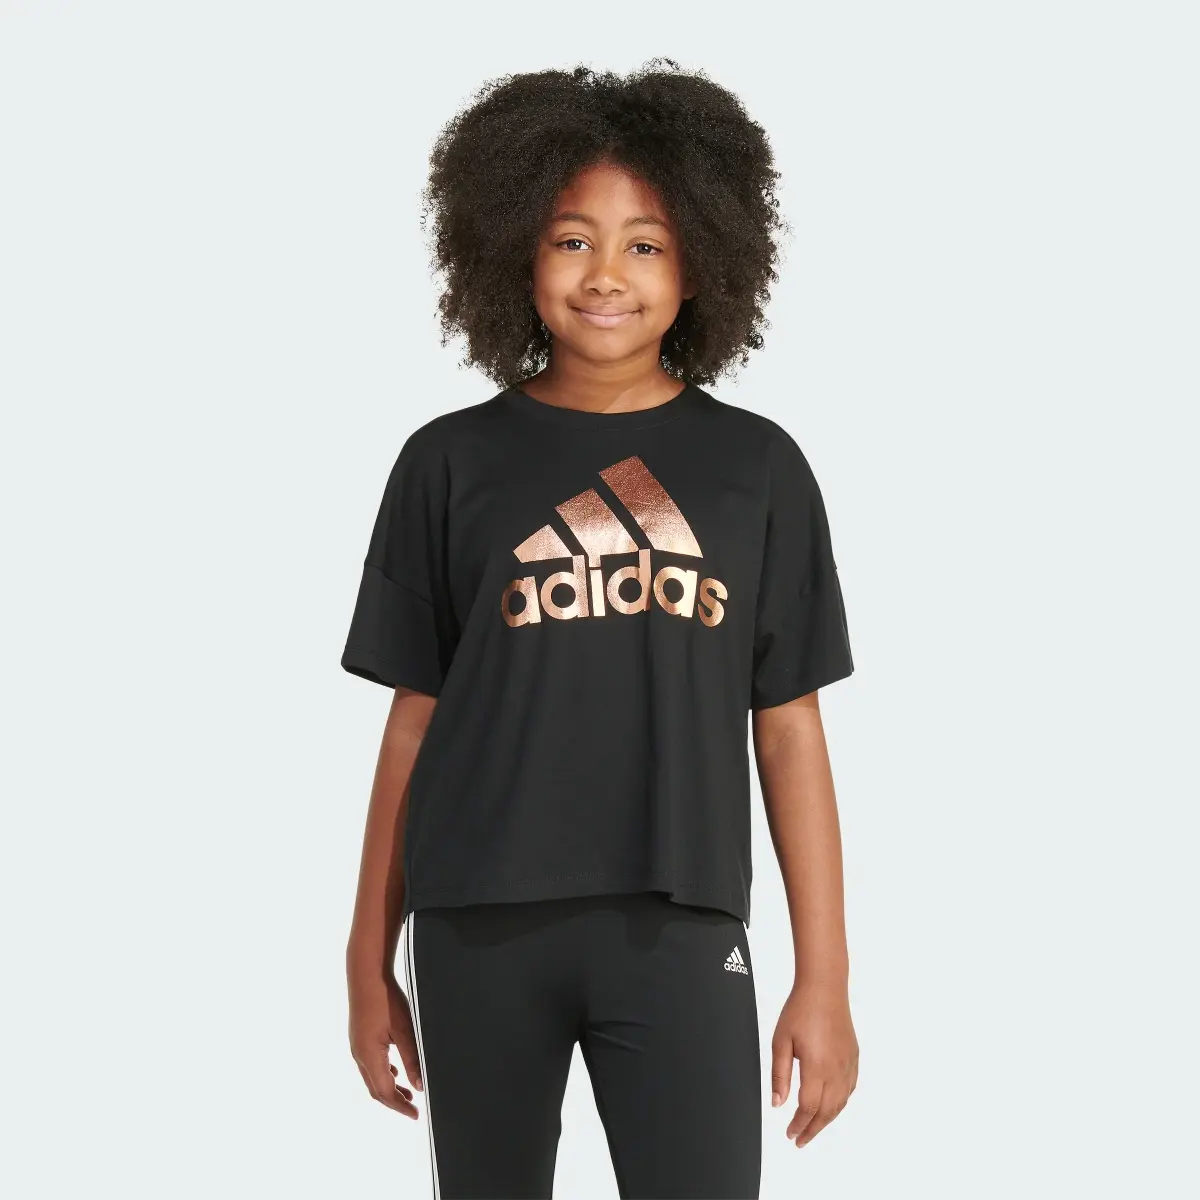 Adidas Short Sleeve Loose Box Tee (Extended Size). 1